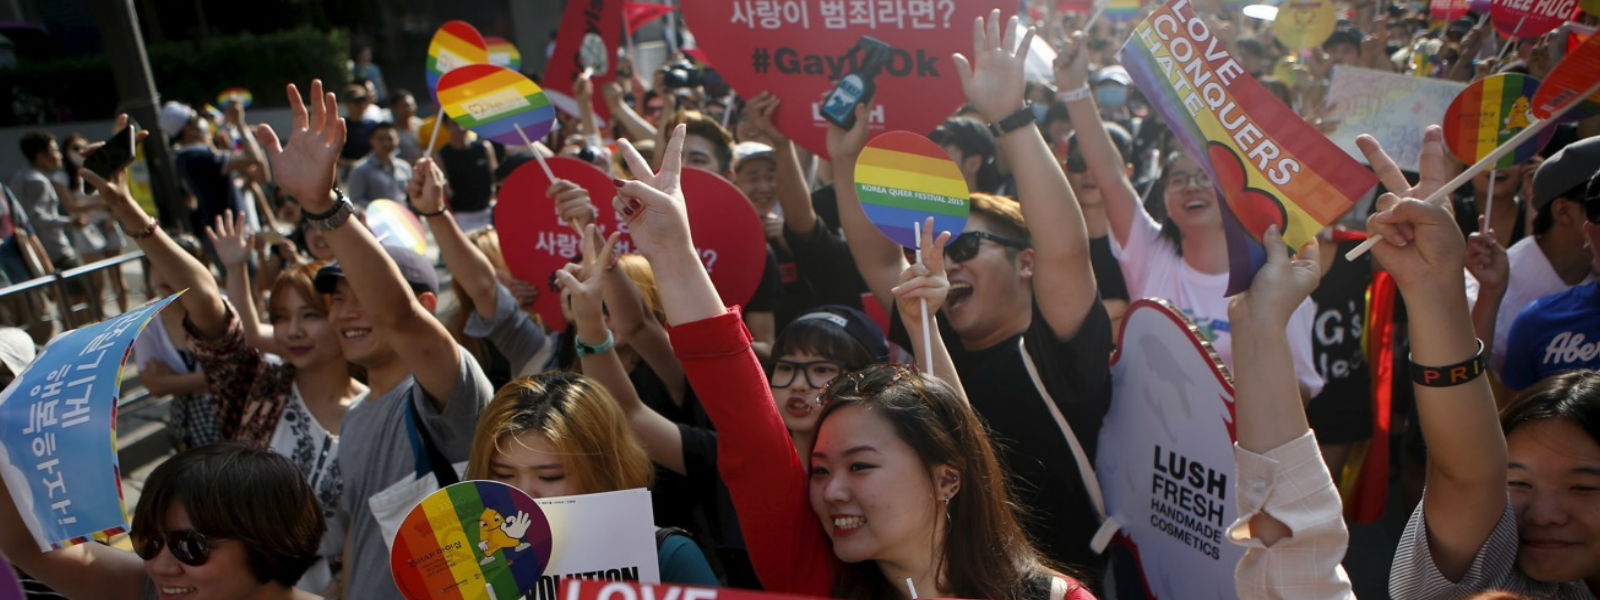 South Korea's LGBT supporters demands for equality